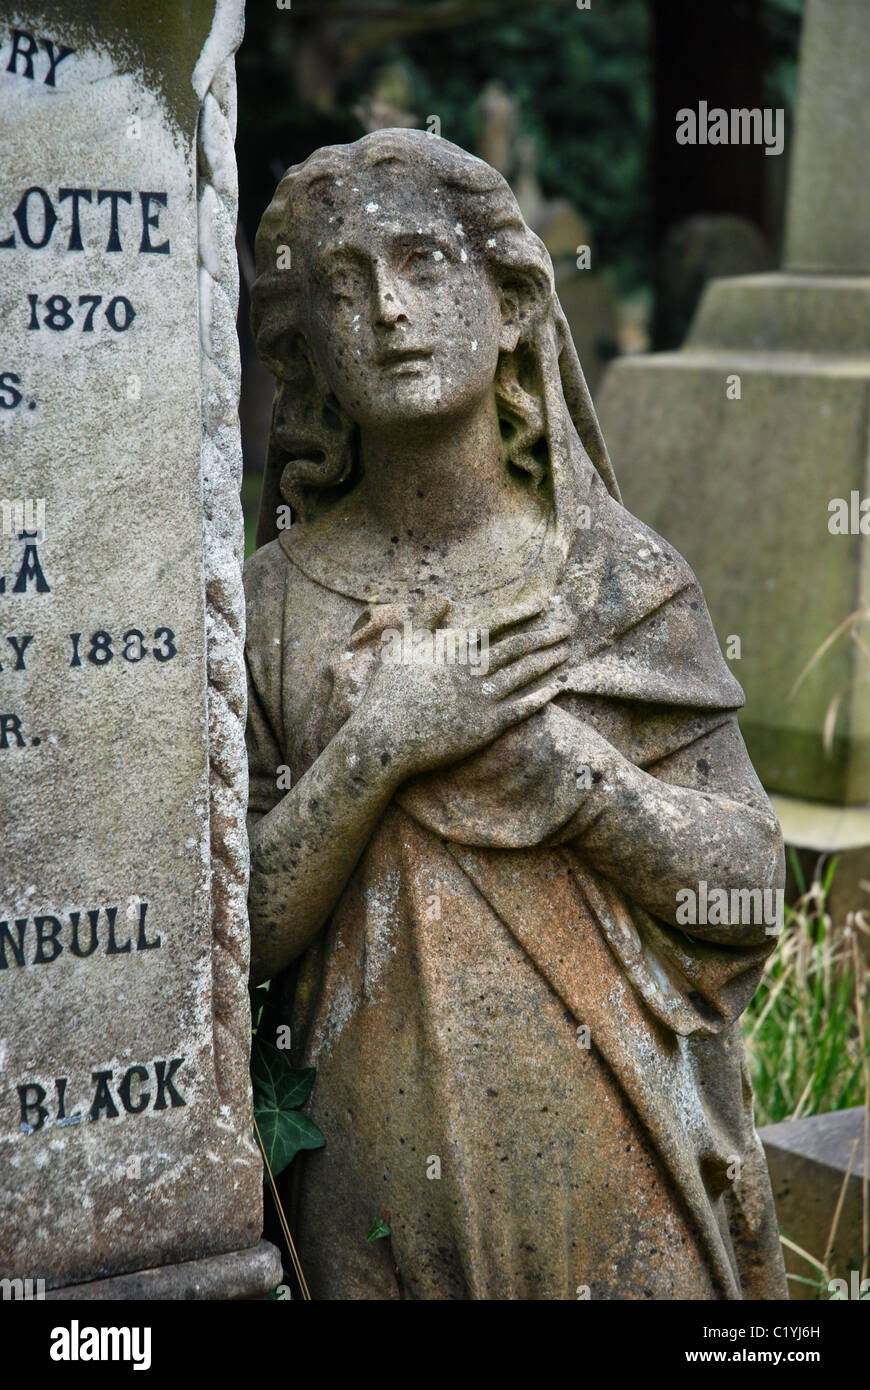 Statue of a woman in mourning by a headstone in a cemetery in Edinburgh, Scotland, UK. Stock Photo